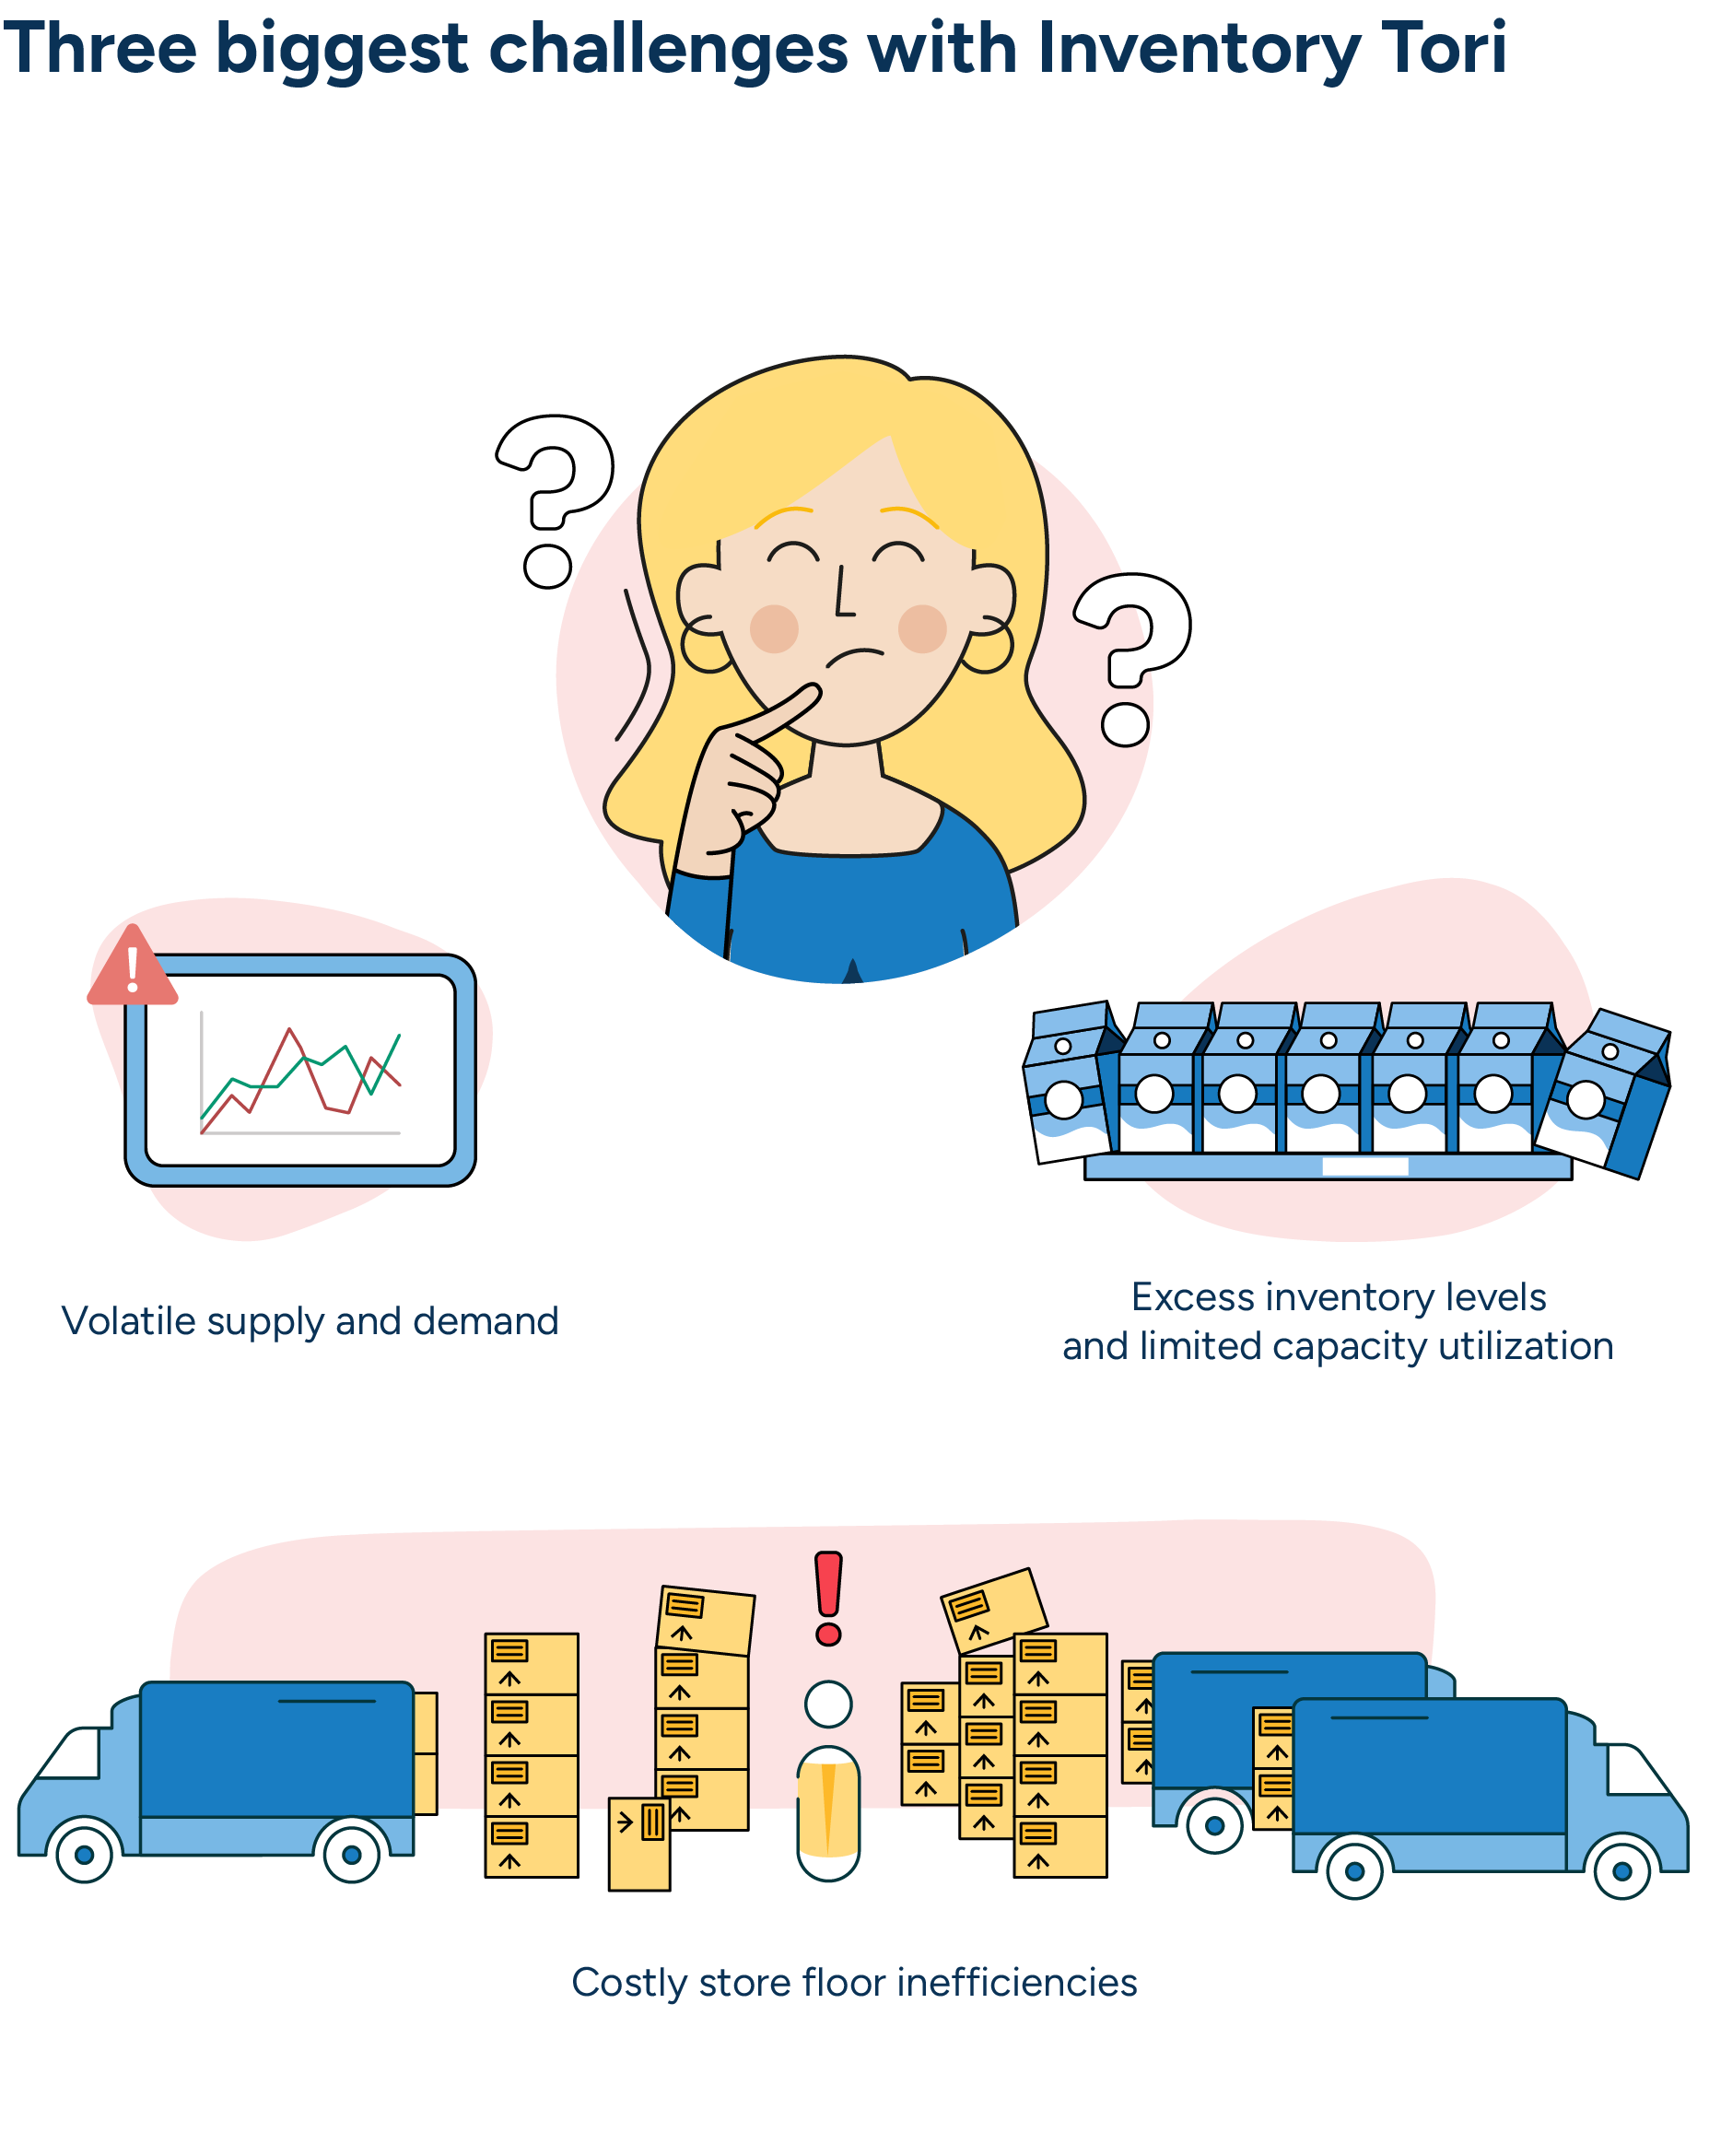 An illustration of a theoretical inventory manager named Inventory Tori which highlights three major challenges of inventory planning: volatile supply and demand, excess inventory levels and limited capacity utilization, and costly store floor inefficiencies.